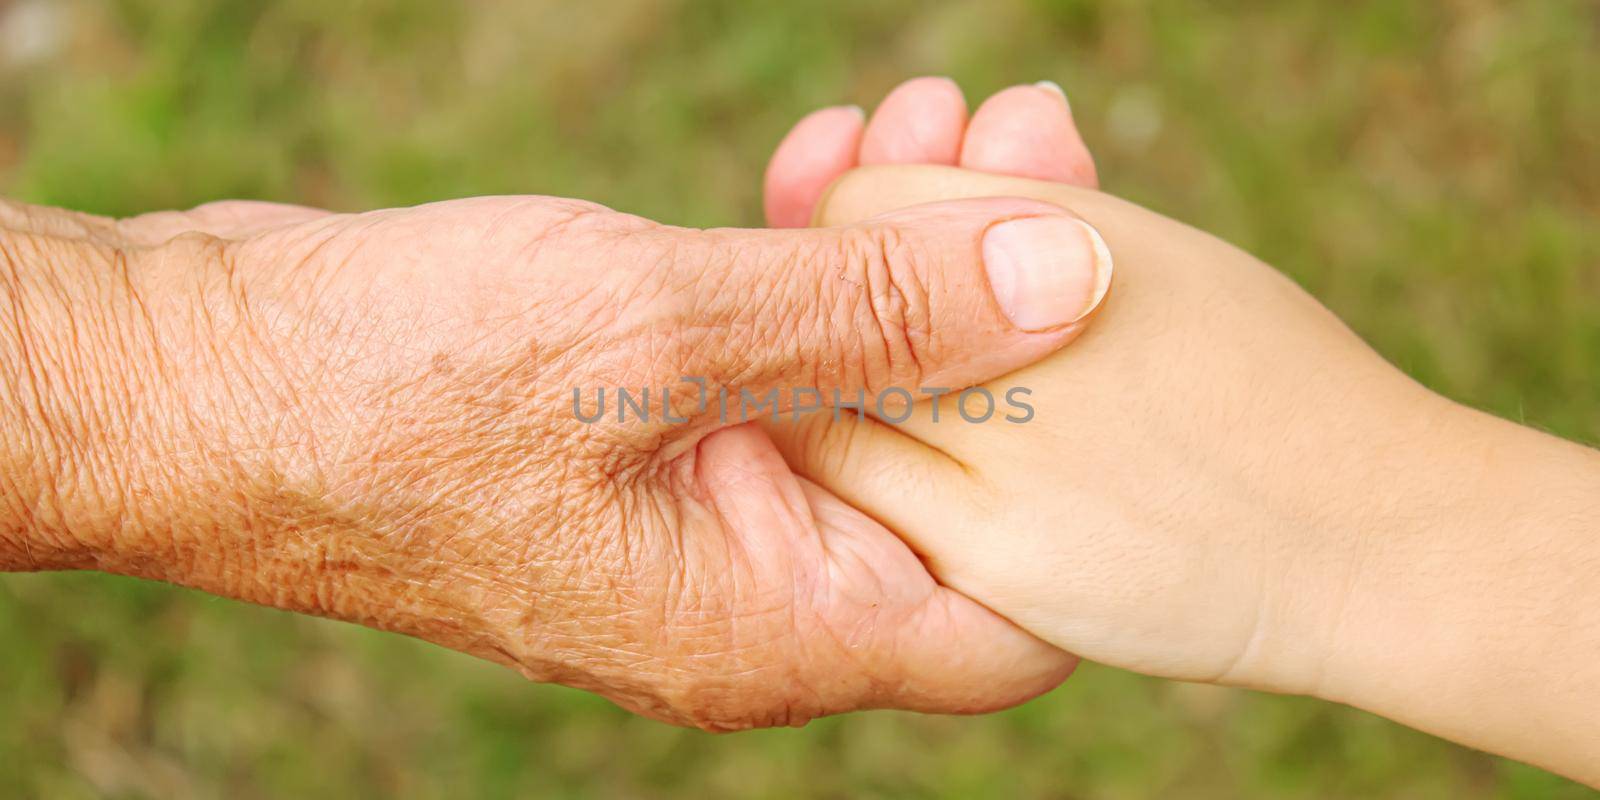 old man holding child's hands. selective focus.People